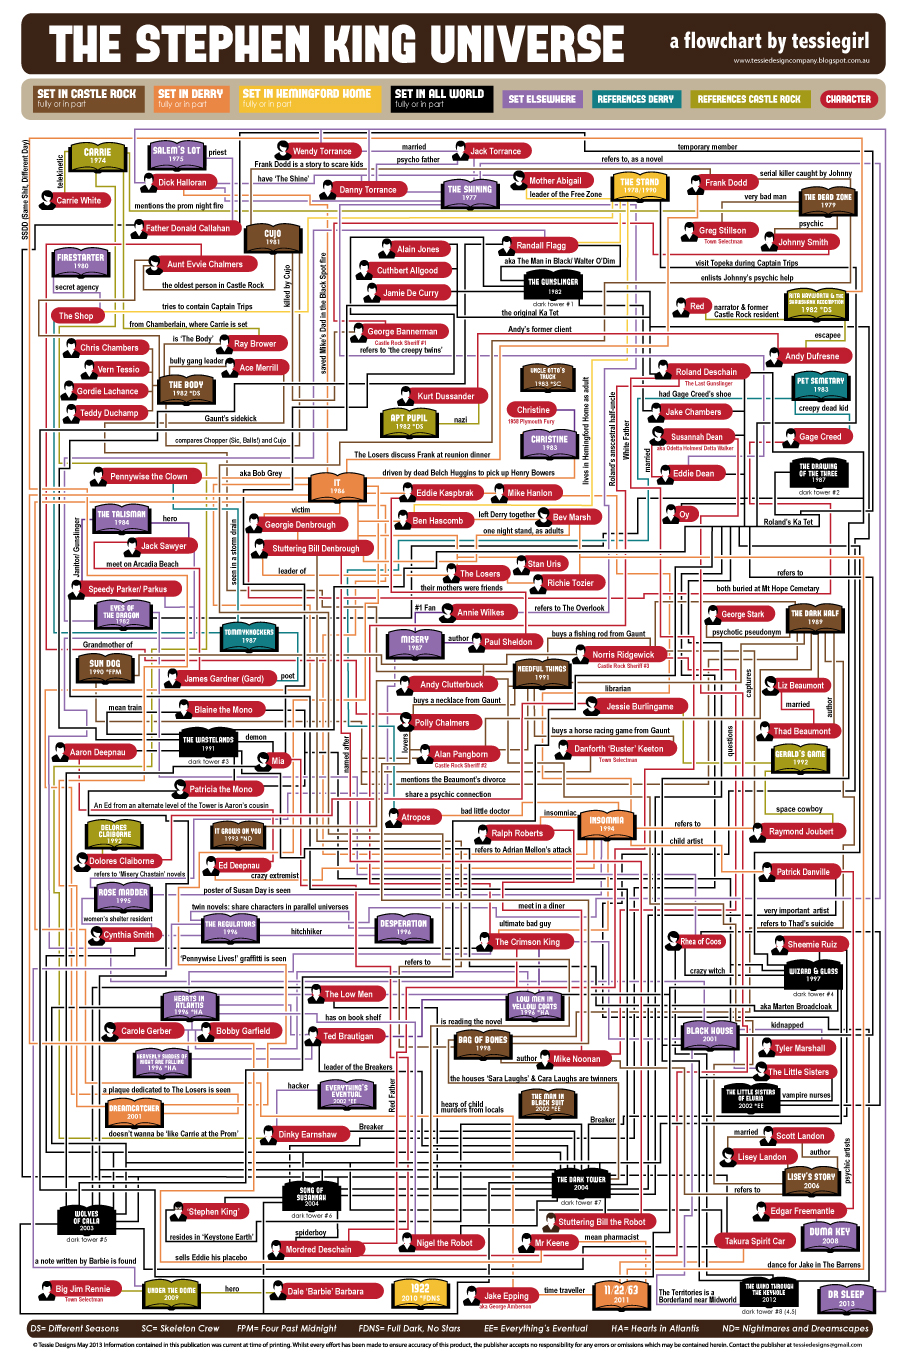 The Stephen King Universe infographic poster